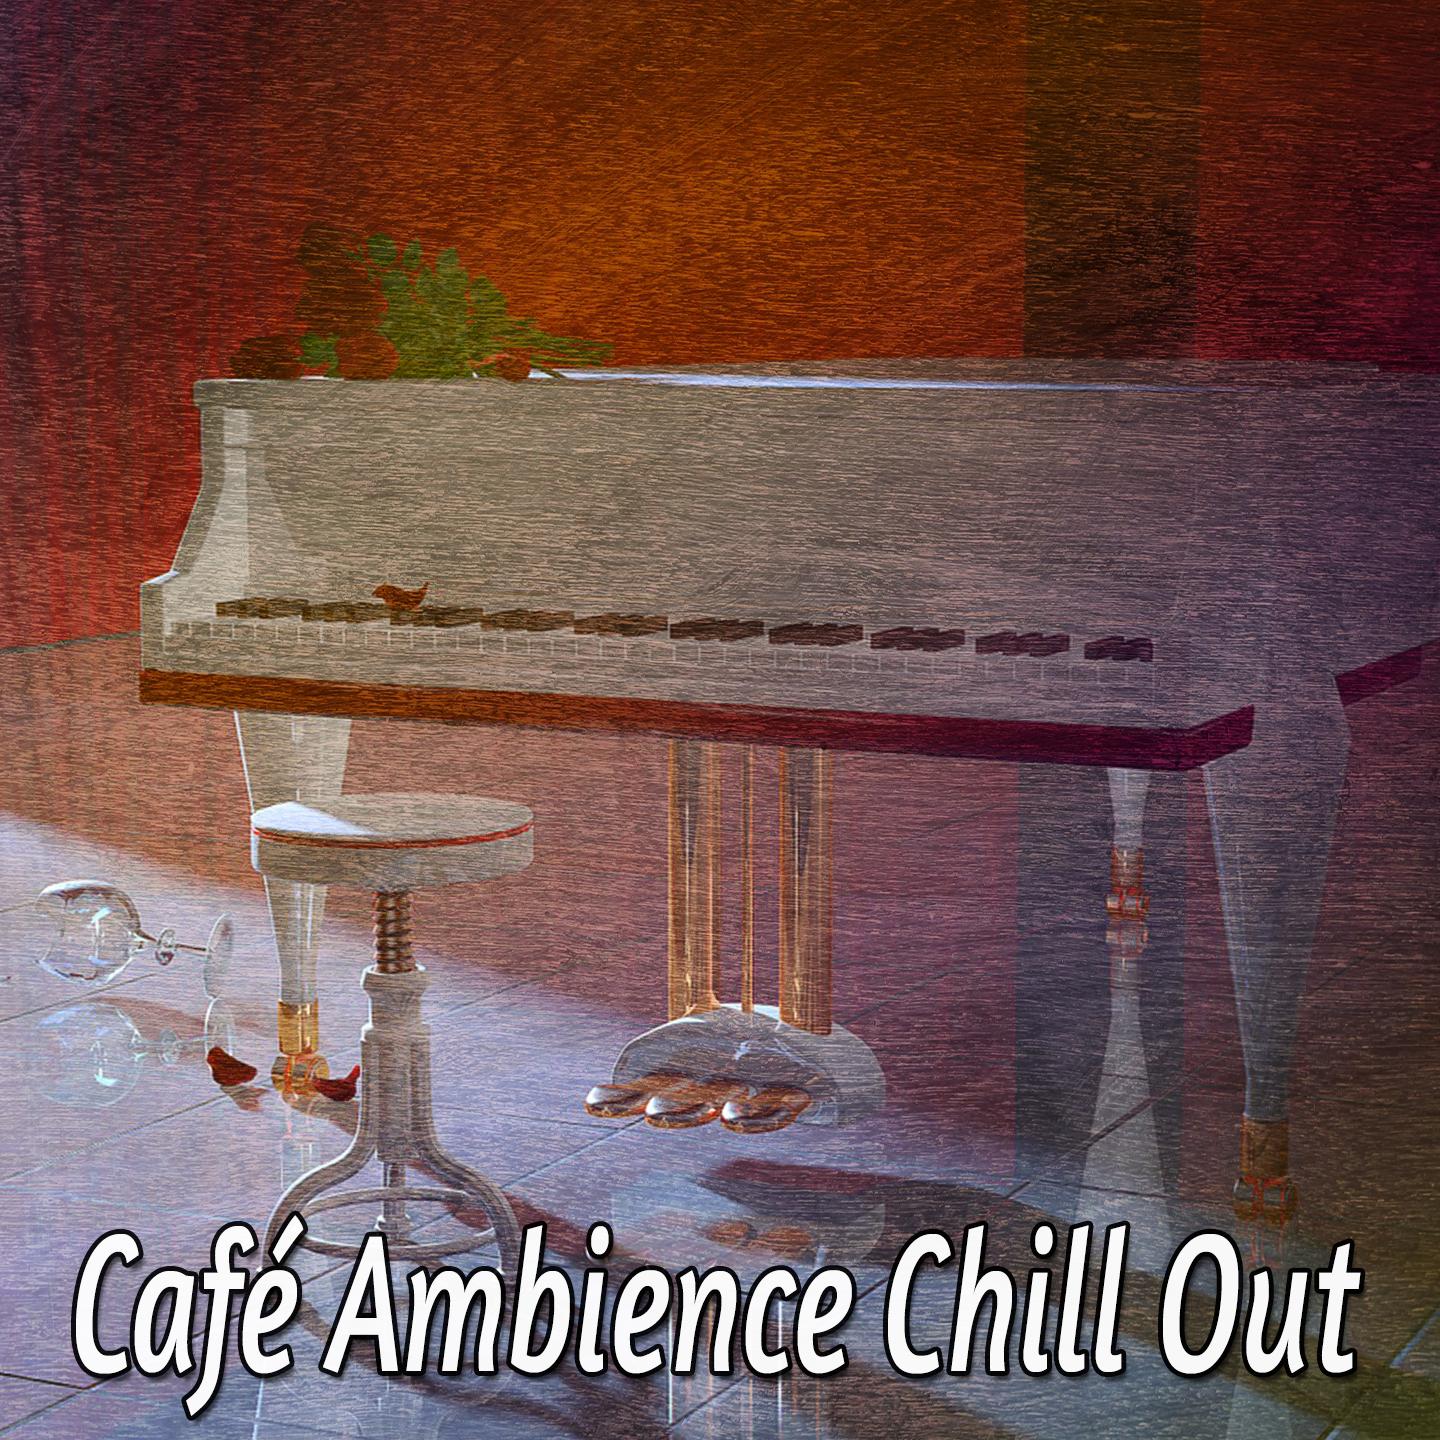 Cafe Ambience Chill Out